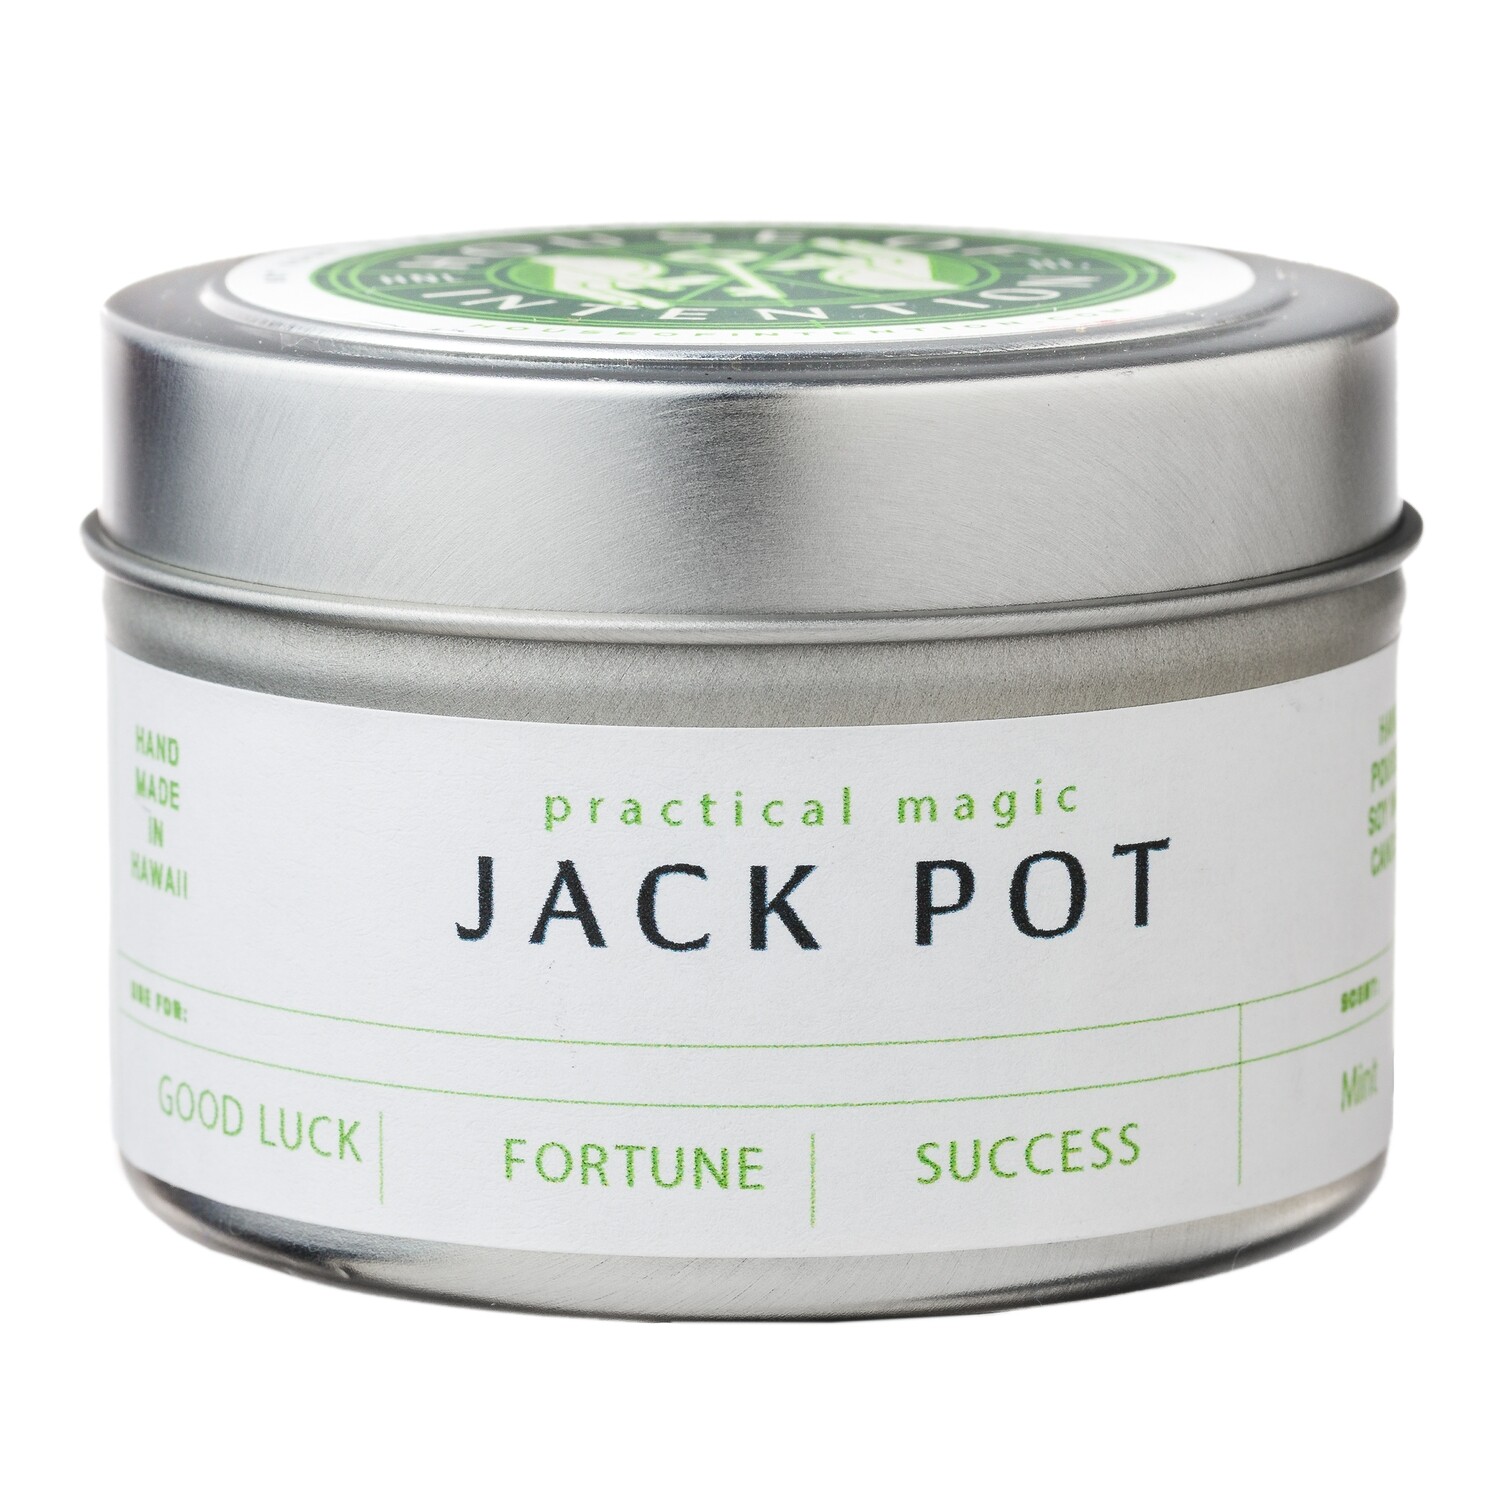 Jackpot House Of Intention practical magic collection